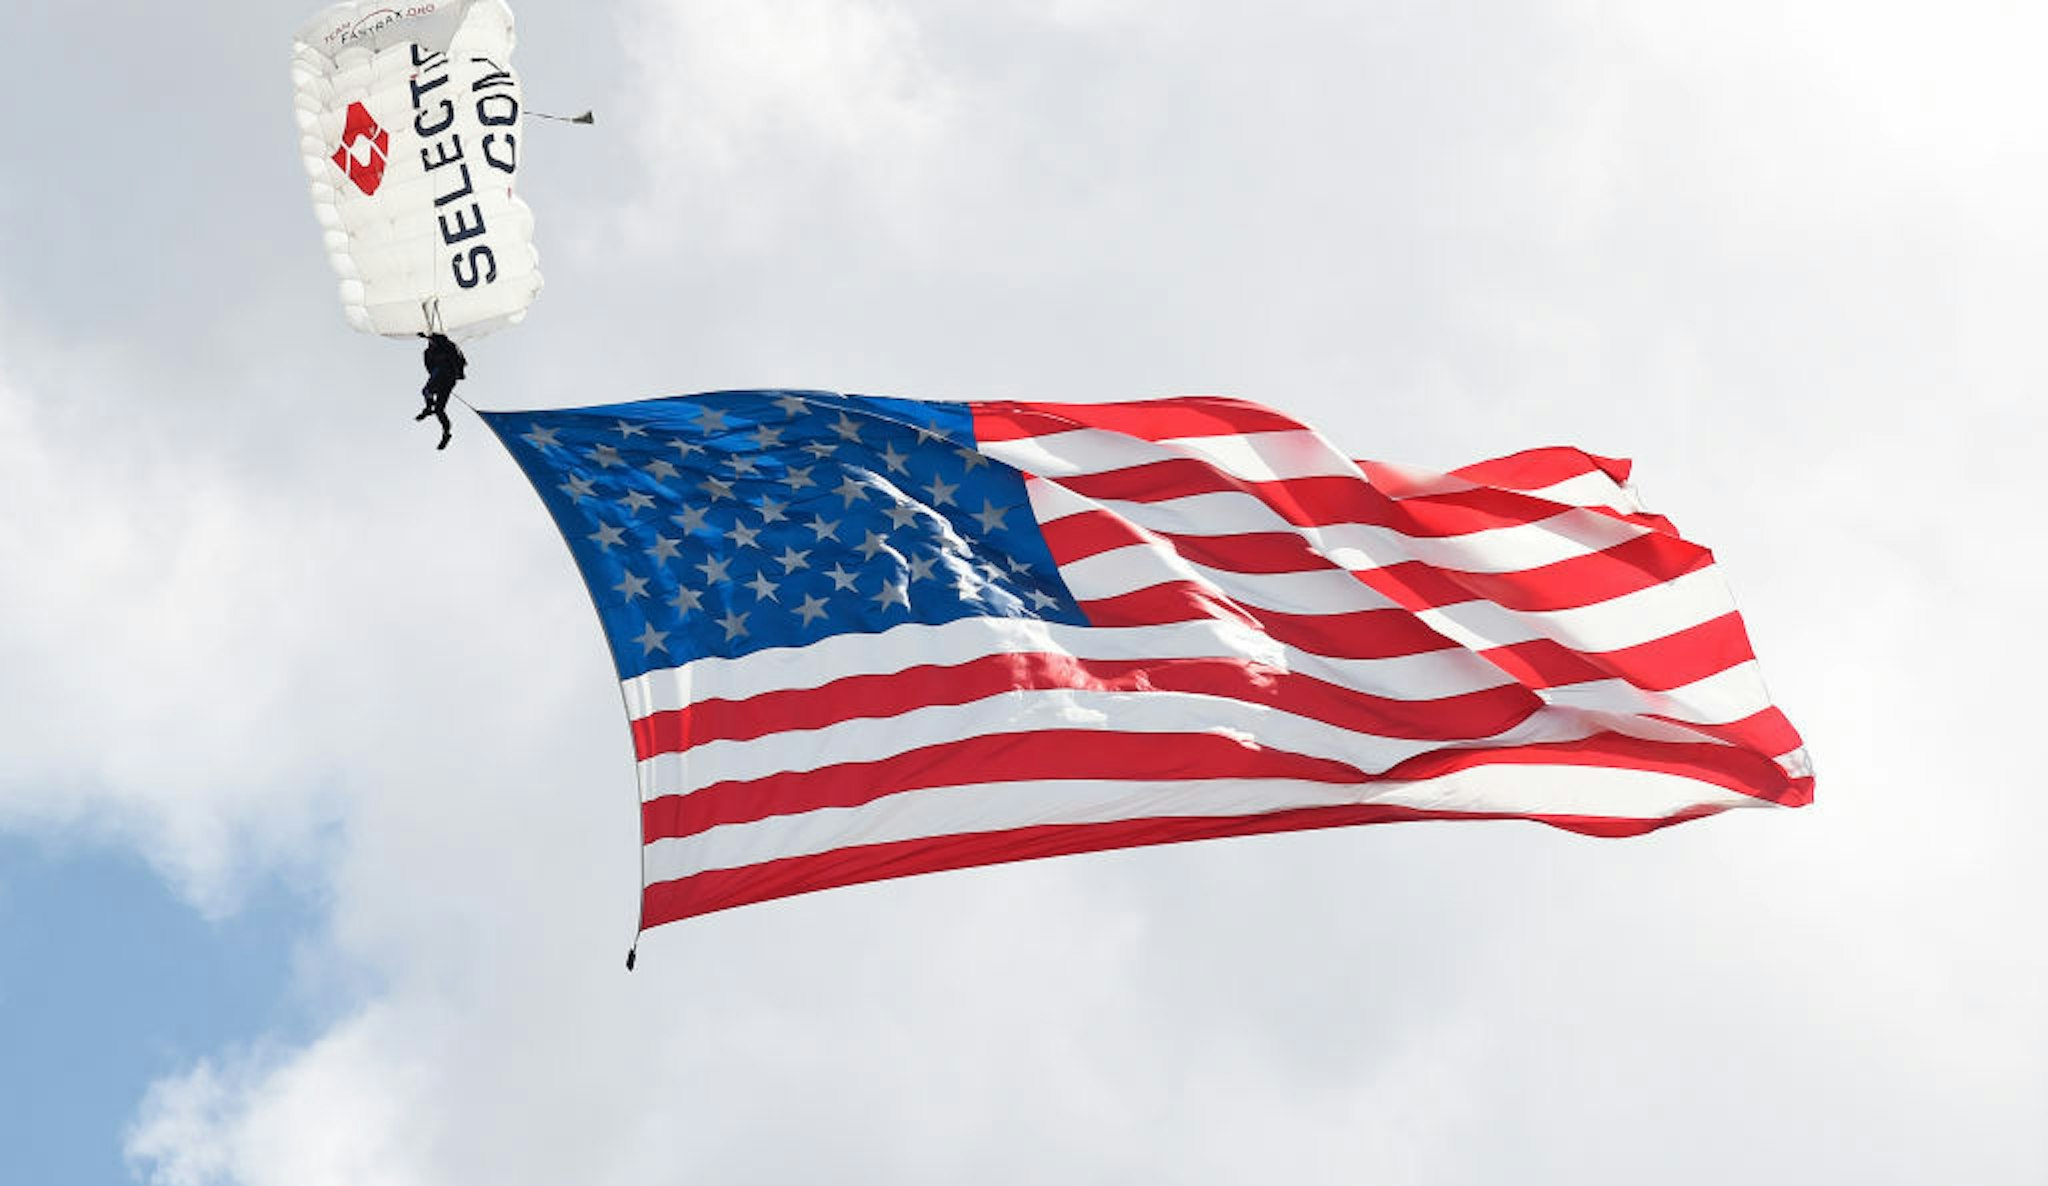 LEBANON, TENNESSEE - JUNE 20: Skydivers from Team Fastrax parachute with an American flag during pre-race ceremonies prior to the NASCAR Cup Series Ally 400 at Nashville Superspeedway on June 20, 2021 in Lebanon, Tennessee. (Photo by Logan Riely/Getty Images)